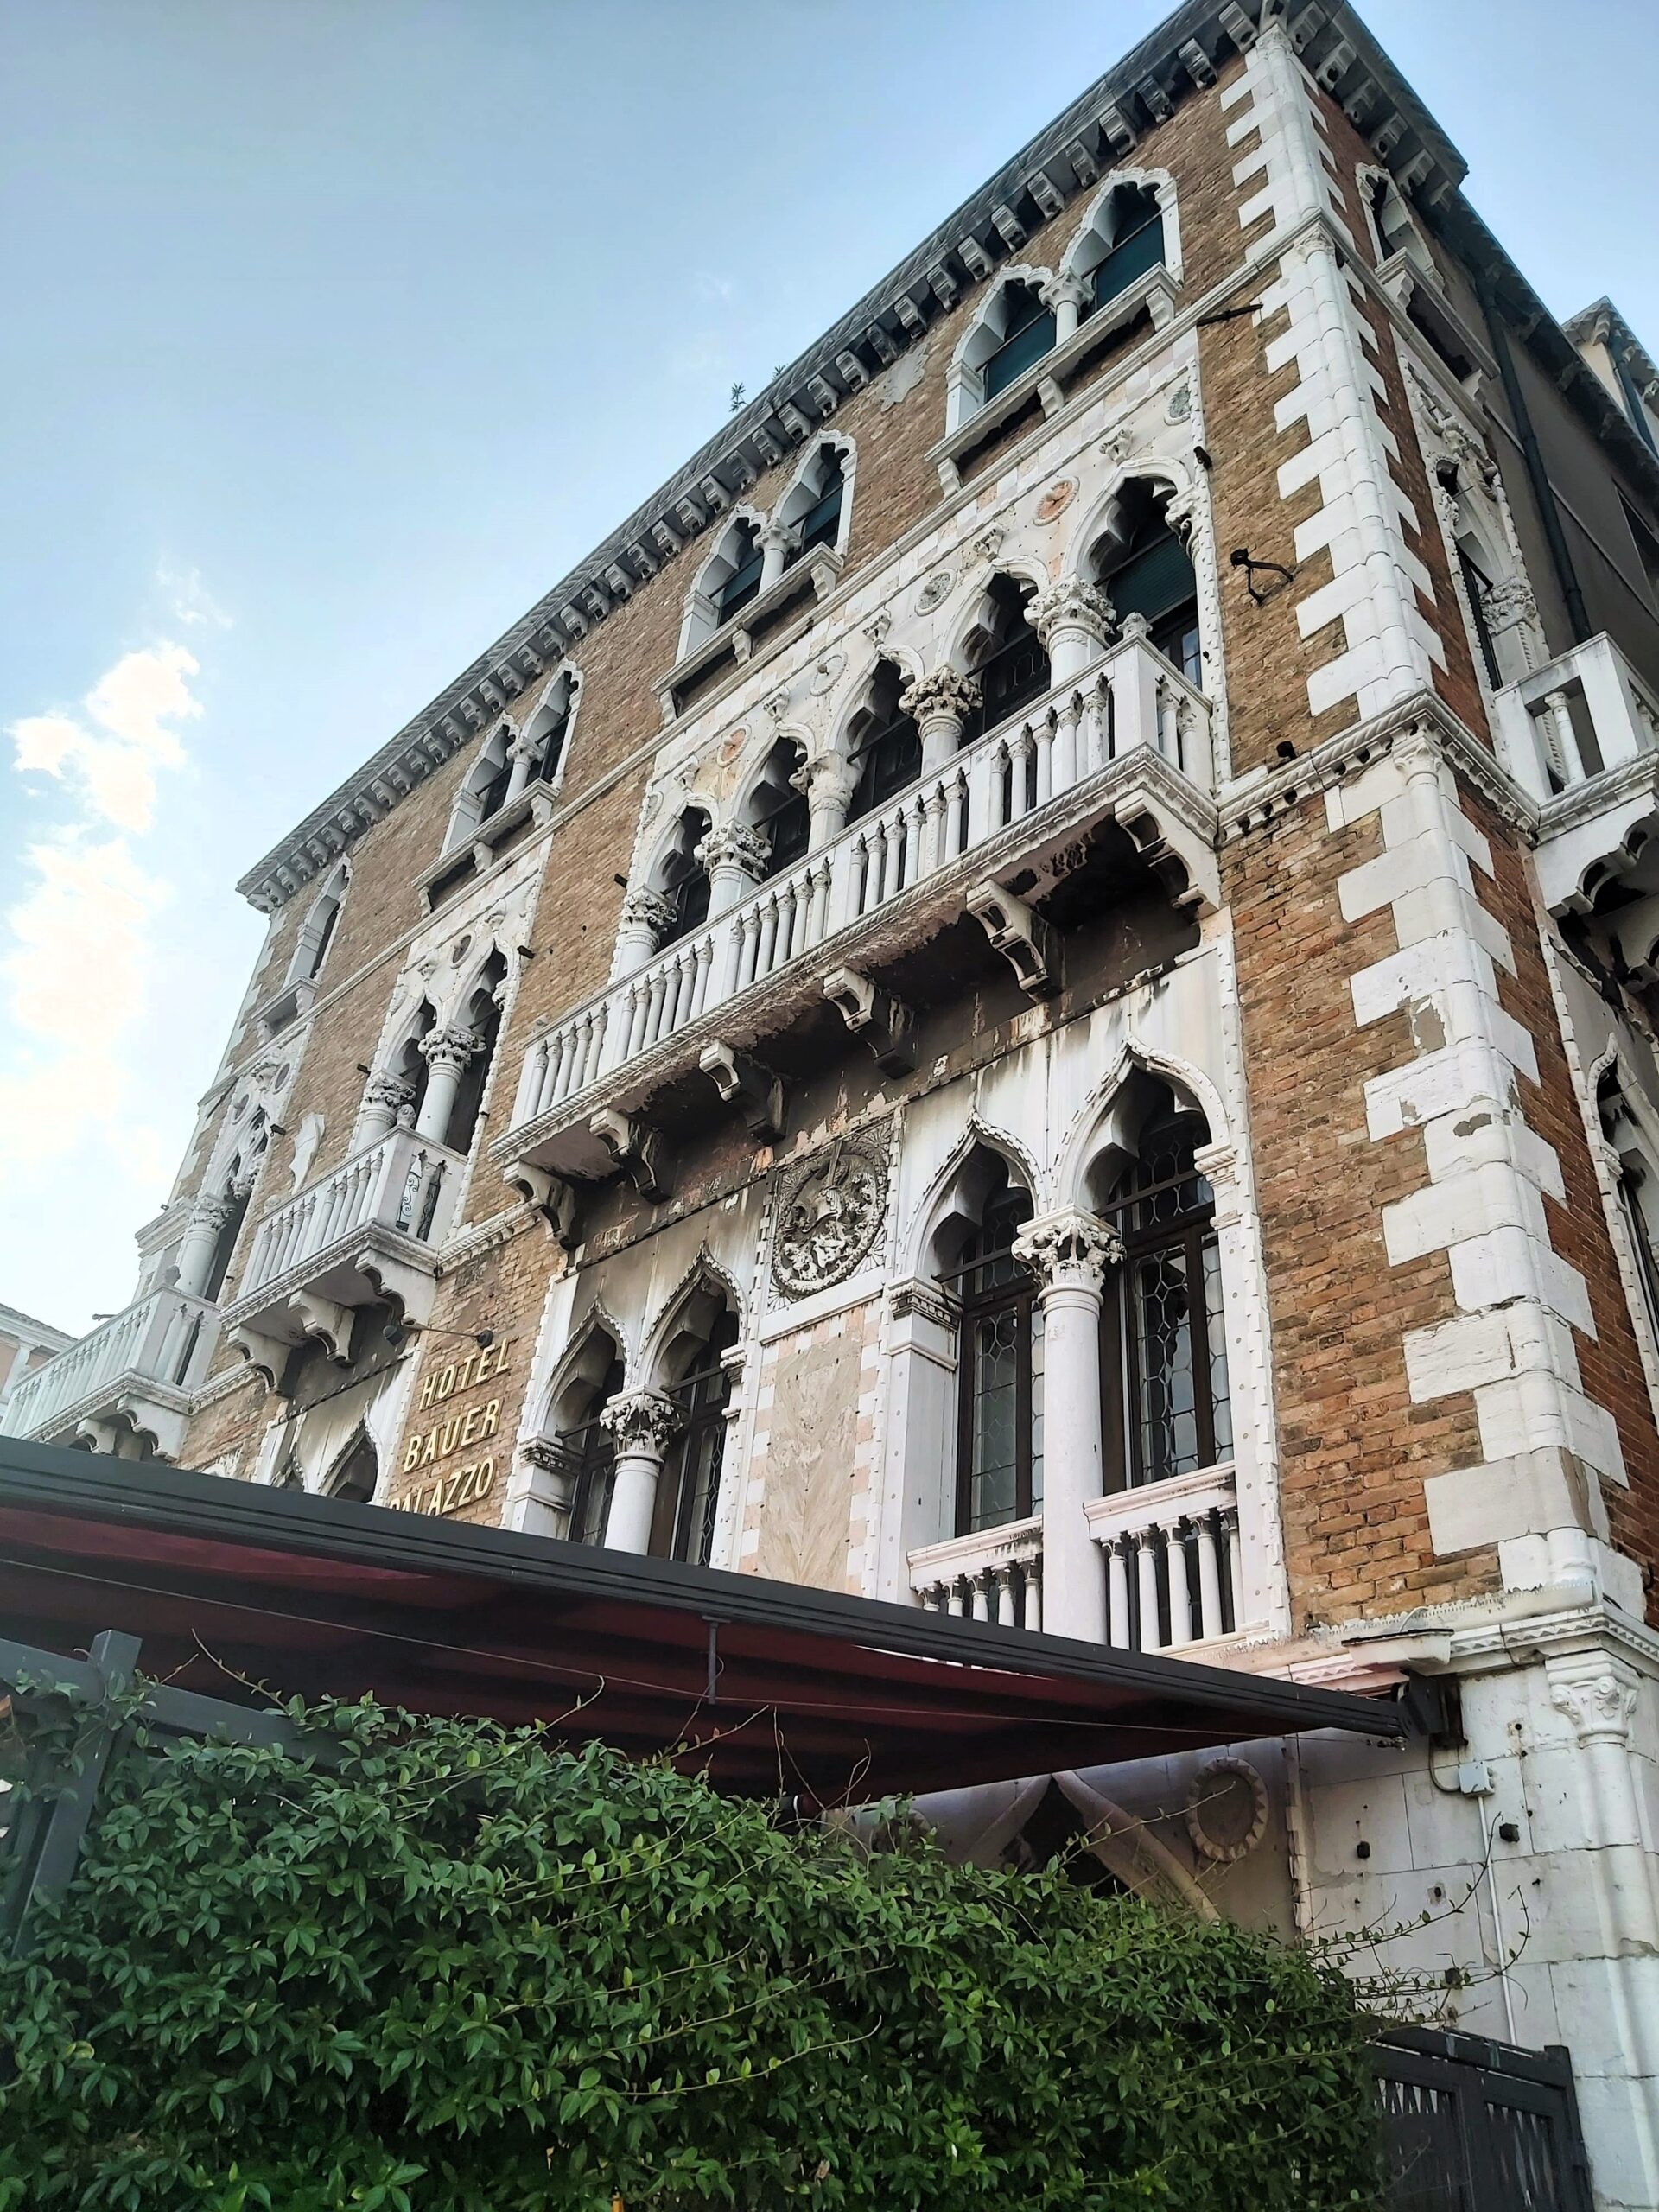 A pretty facade of a building in Venice, Italy, showing Arab influence